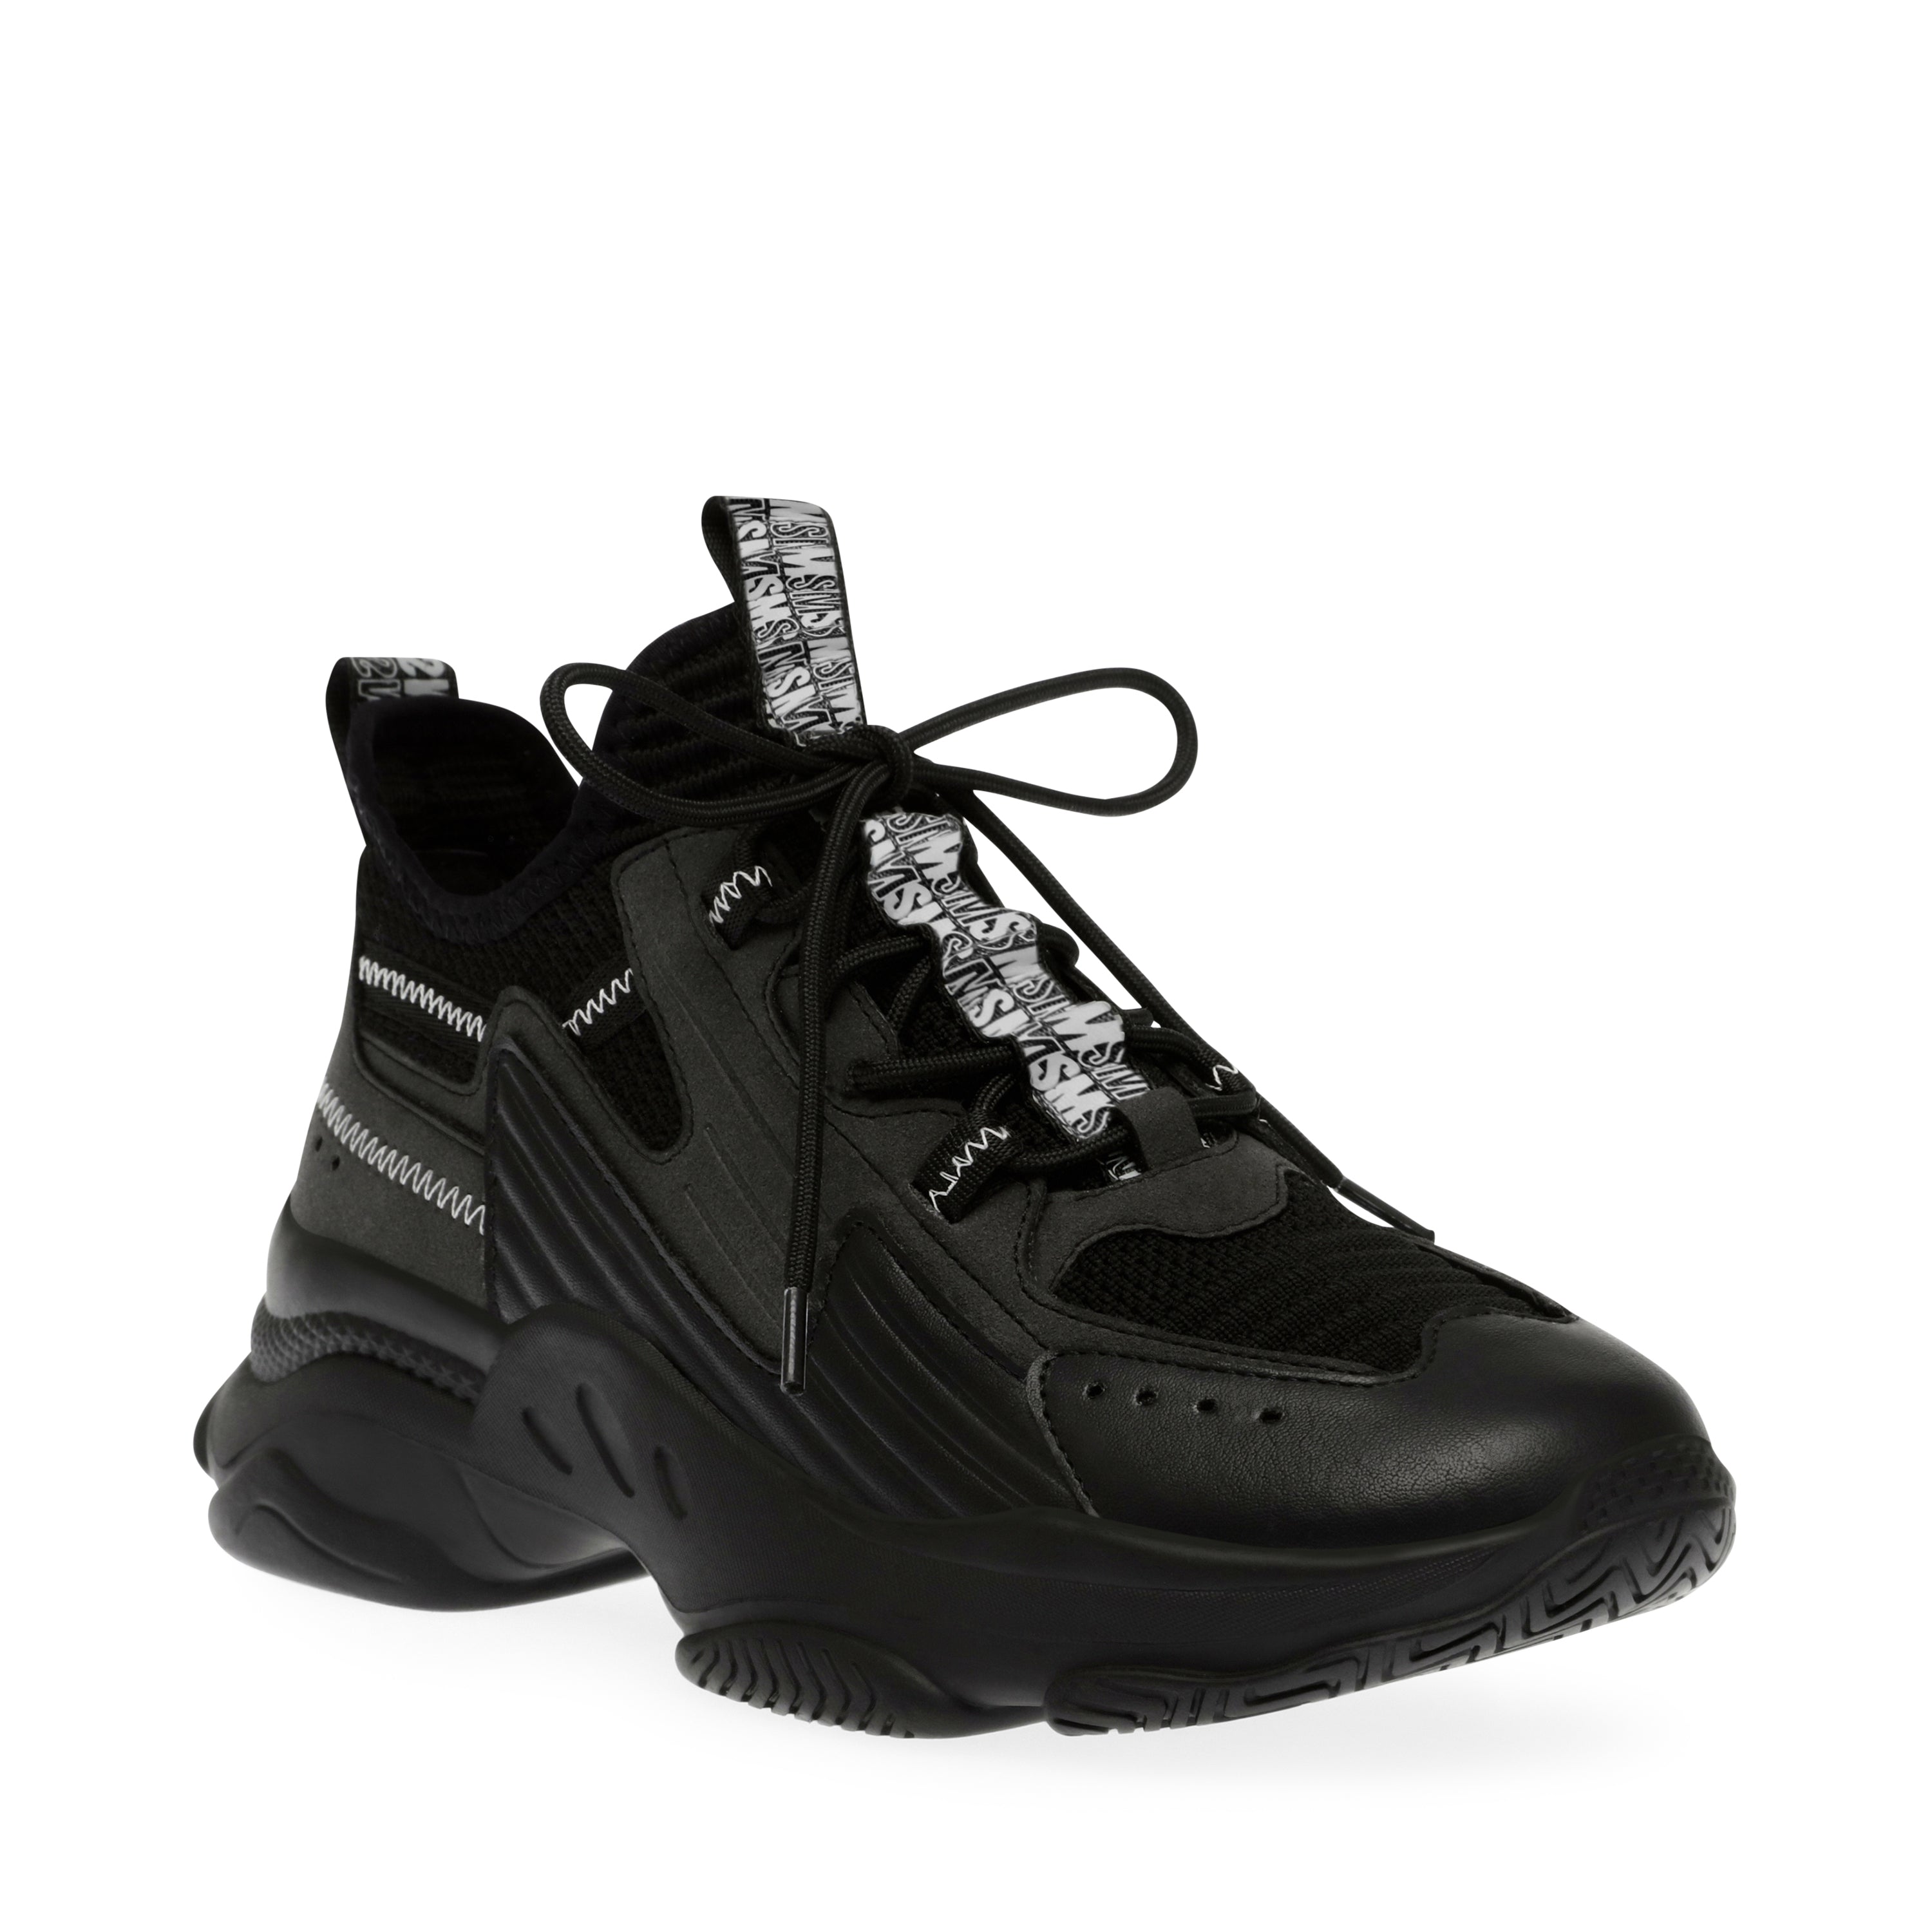 MATCH BOX BLACK/BLACK SNEAKERS- Hover Image